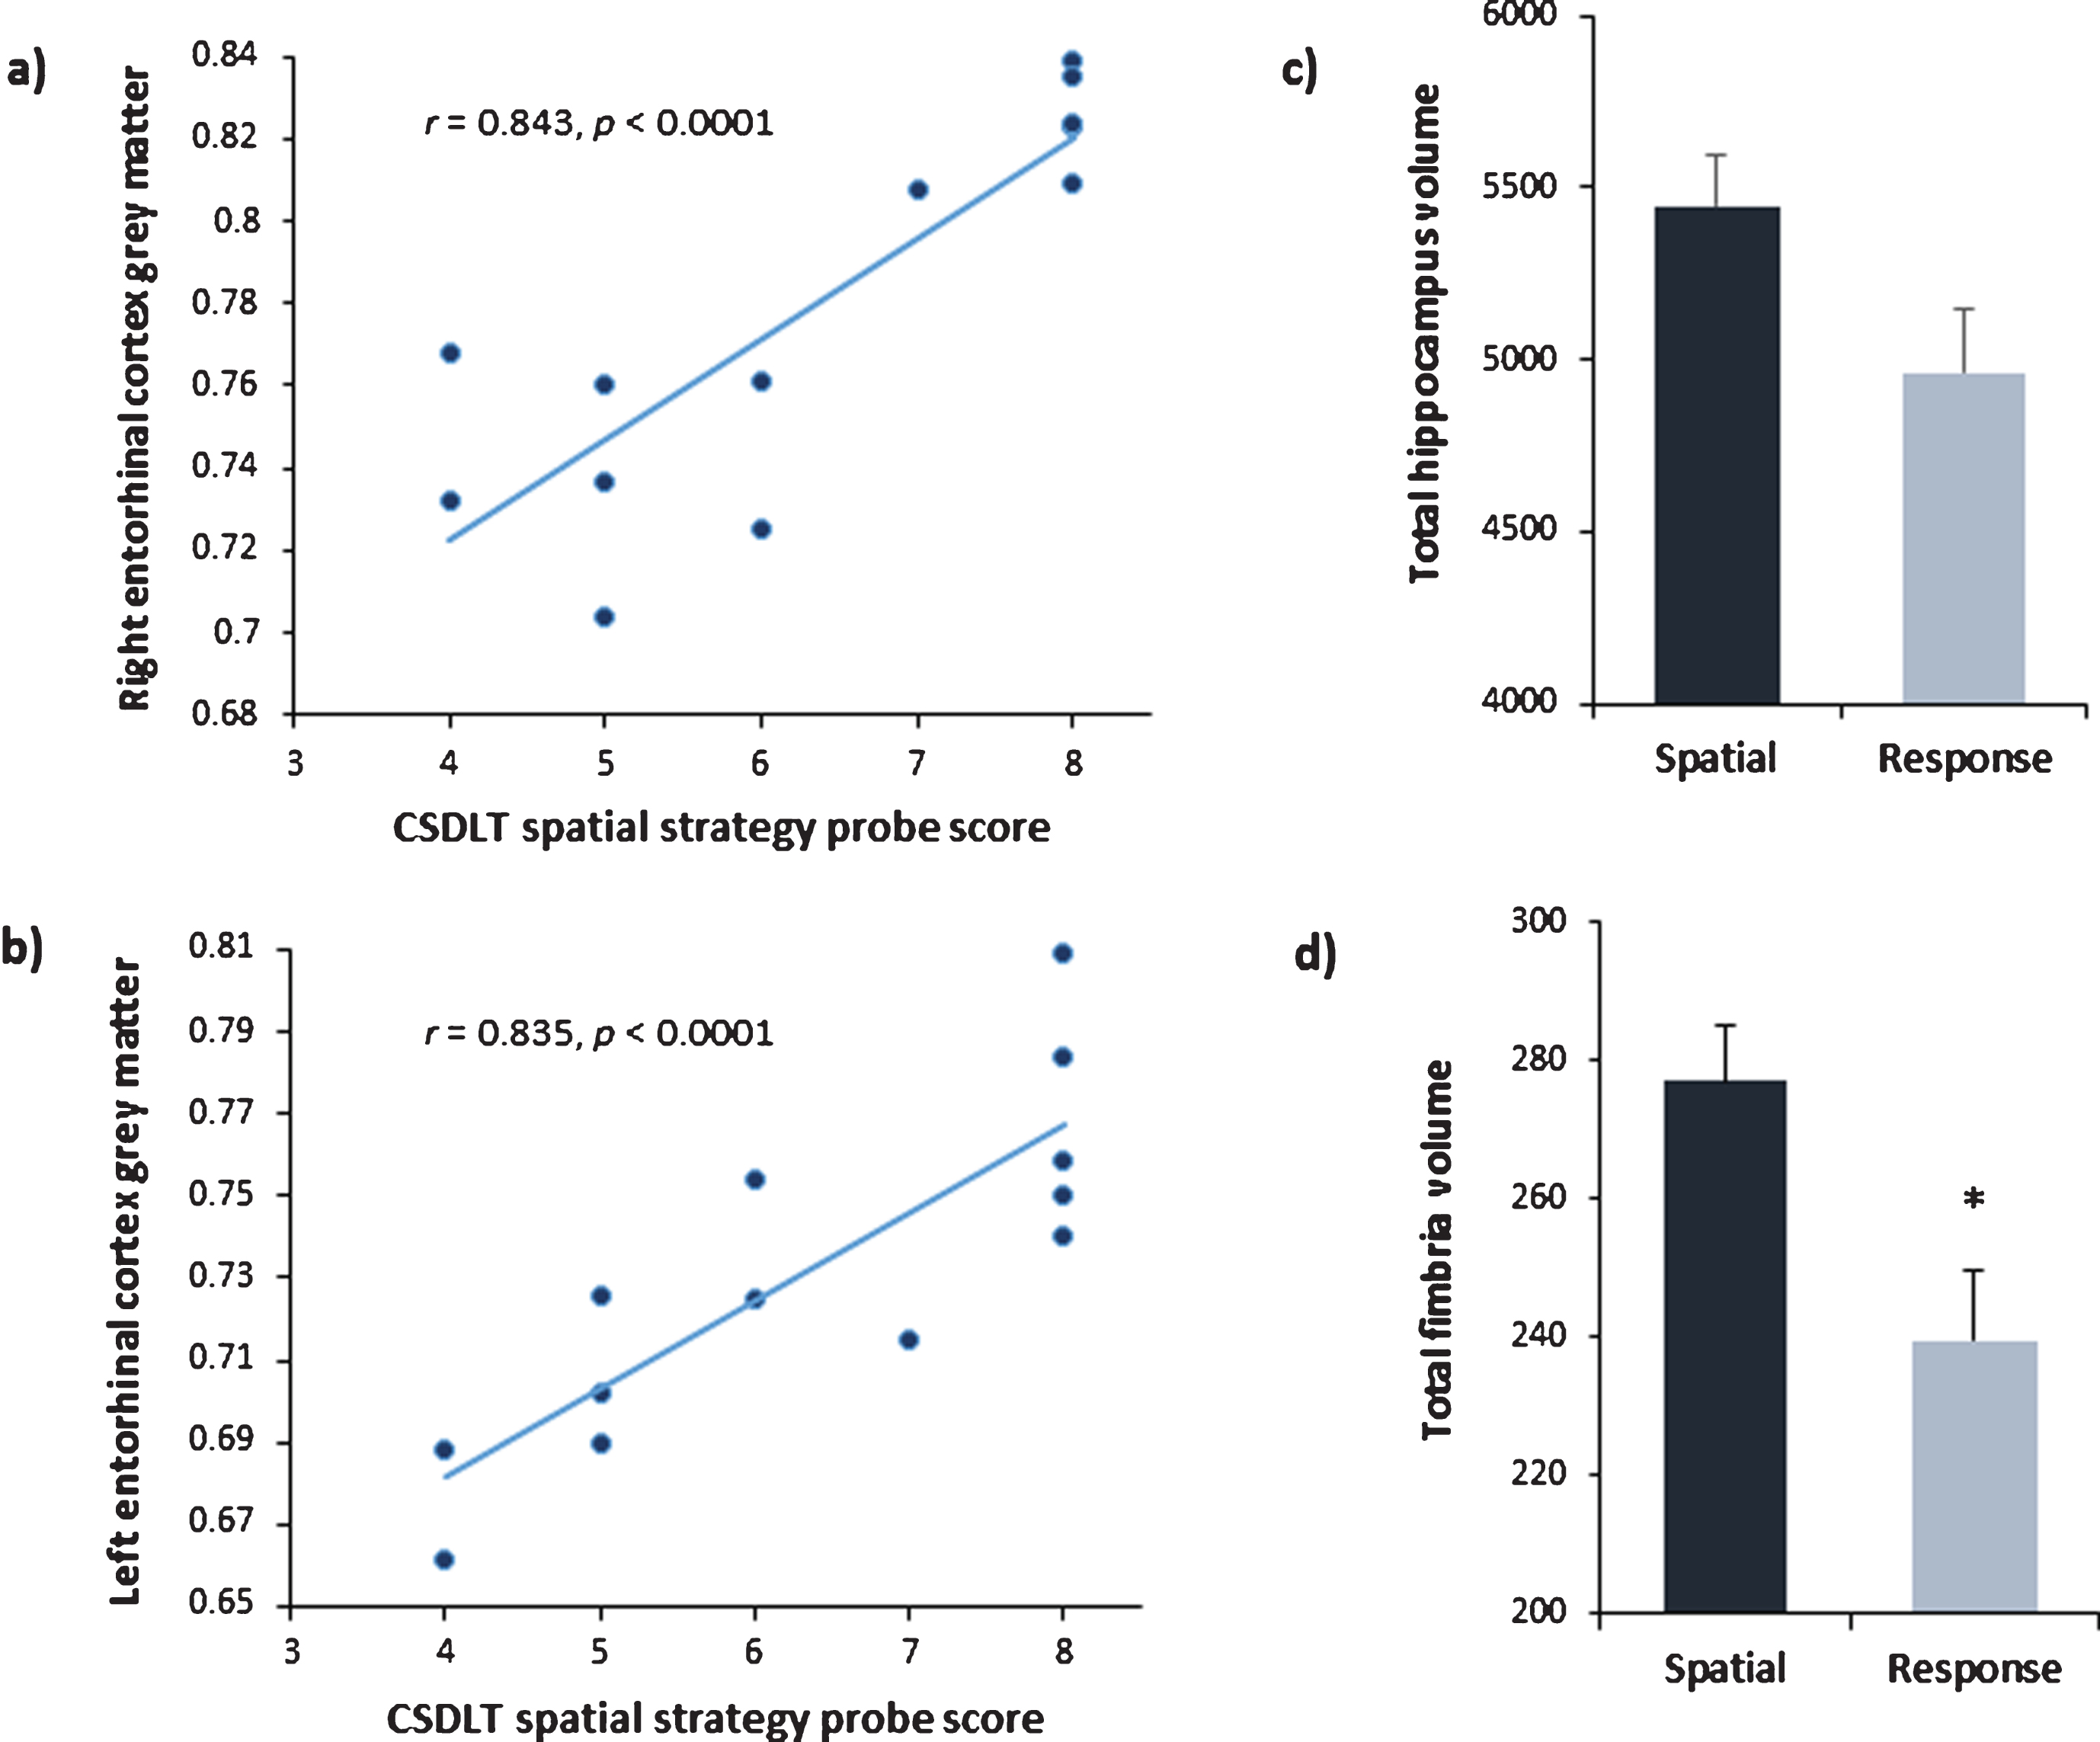 Structural differences between APOE ɛ4 allele carriers who used a spatial strategy and APOE ɛ4 allele carriers who used a response strategy. Positive correlations between CSDLT spatial strategy probe scores (n = 13) and grey matter in the a) right (r = 0.84; p < 0.001, bootstrapped BCa 95% CI [0.60, 0.97]; MNI coordinates: x = 26, y = –1.7, z = –33.1) and b) left entorhinal cortices (r = 0.84; p < 0.001, bootstrapped BCa 95% CI [0.63, 0.95]; MNI coordinates: x = –33, y = –14, z = –27.9) of APOE ɛ4 allele carriers. In APOE ɛ4 allele carriers, increased use of spatial strategies is associated with increased grey matter in the entorhinal cortex. c) APOE ɛ4 allele carriers who use a spatial strategy (n = 6; mean = 277.00 SEM±7.92) have a larger total hippocampal volume compared to APOE ɛ4 allele carriers who use a response strategy (n = 7; mean = 239.43 SEM±10.18; F = 3.96, p = 0.072, bootstrapped BCa 95% CI [31.17, 946.04]) d) APOE ɛ4 allele carriers who use a spatial strategy (mean = 5448.00 SEM±146.37) also have a larger total fimbria volume compared to APOE ɛ4 allele carriers who use a response strategy (mean = 4962.43 SEM±187.28; F = 8.04, p < 0.05, bootstrapped BCa 95% CI [8.59, 67.01]).